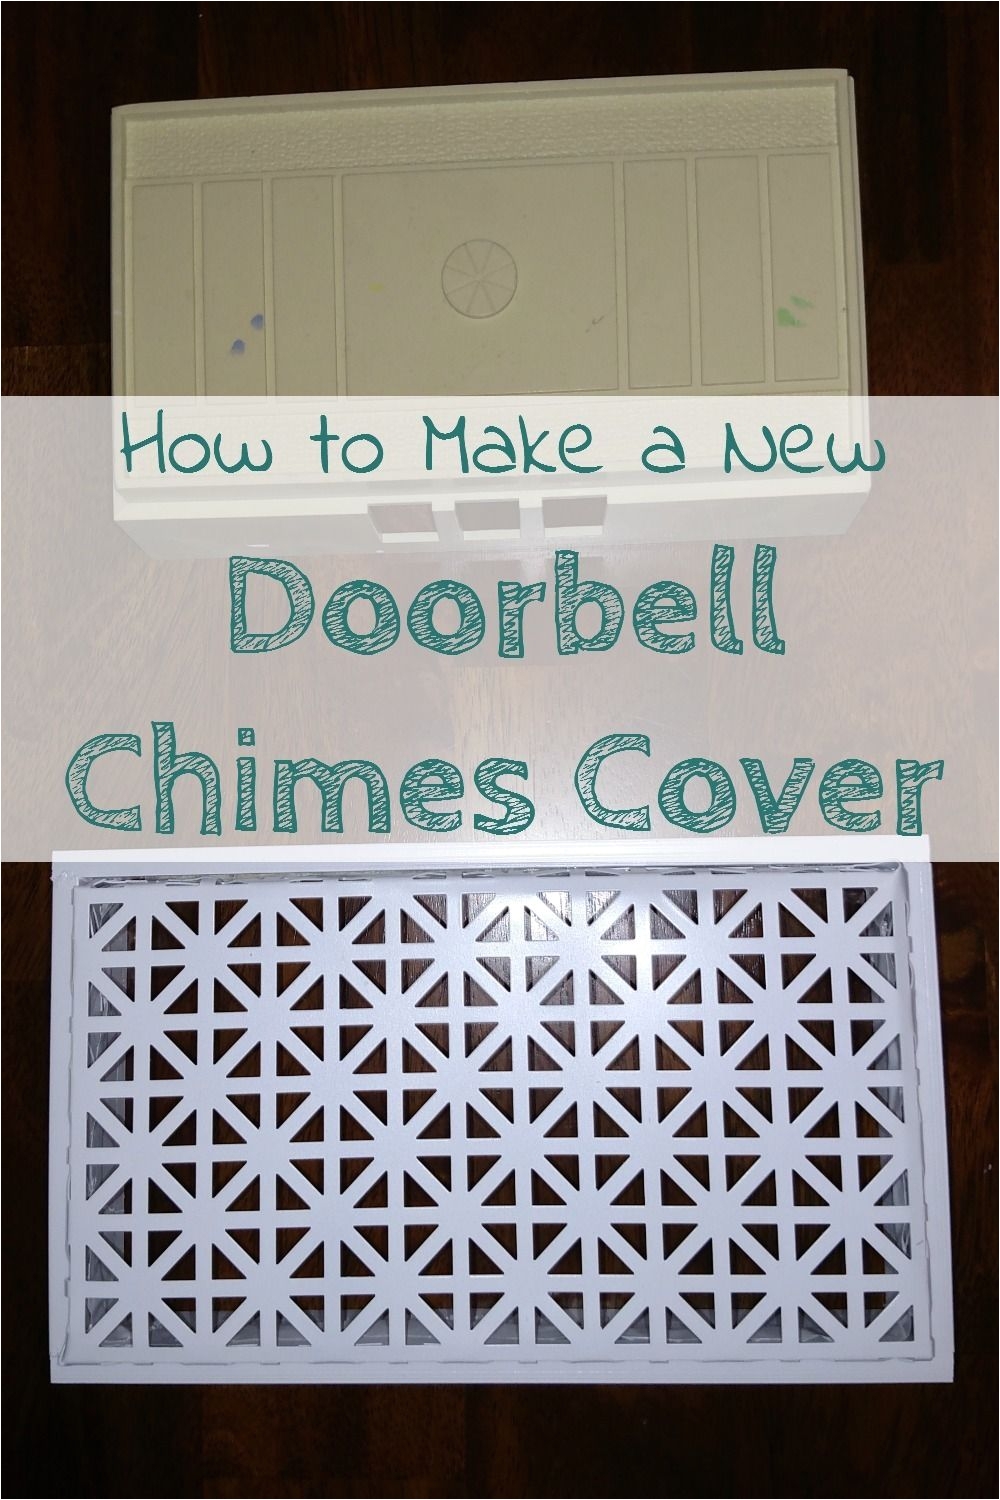 doorbell chimes can be such an eye sore especially outdated ones make a new cover